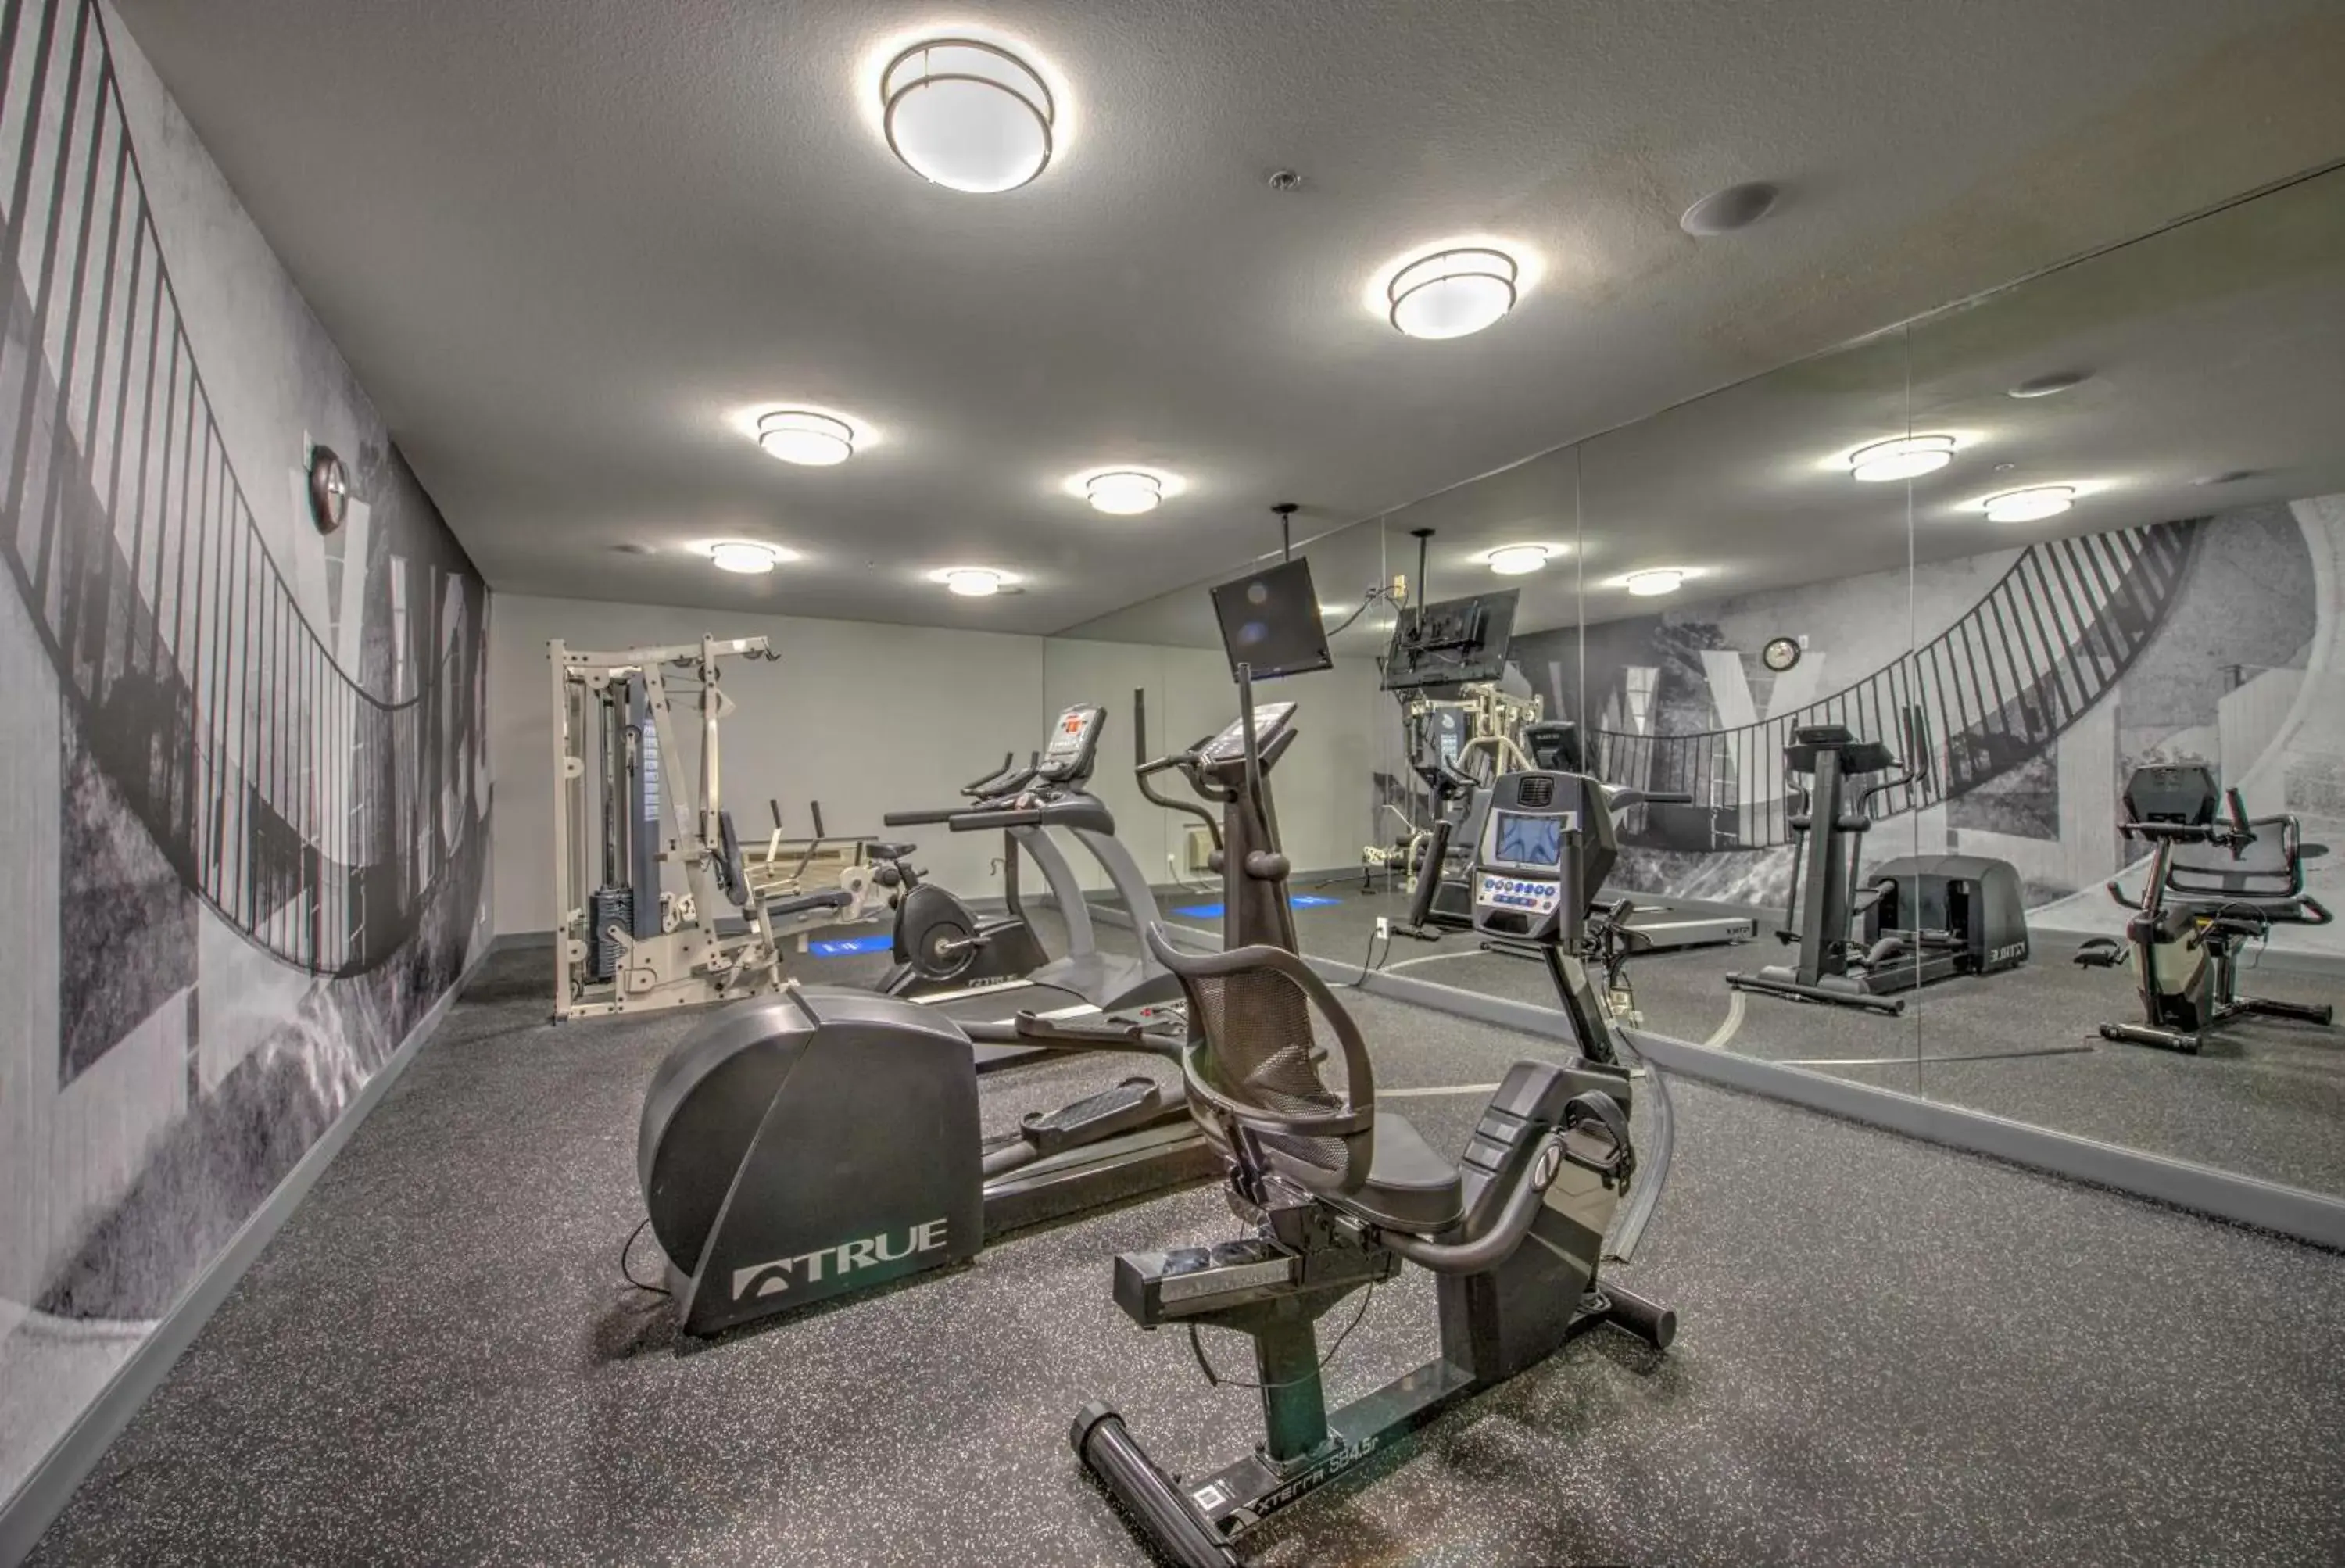 Fitness centre/facilities, Fitness Center/Facilities in Best Western Plus Media Center Inn & Suites